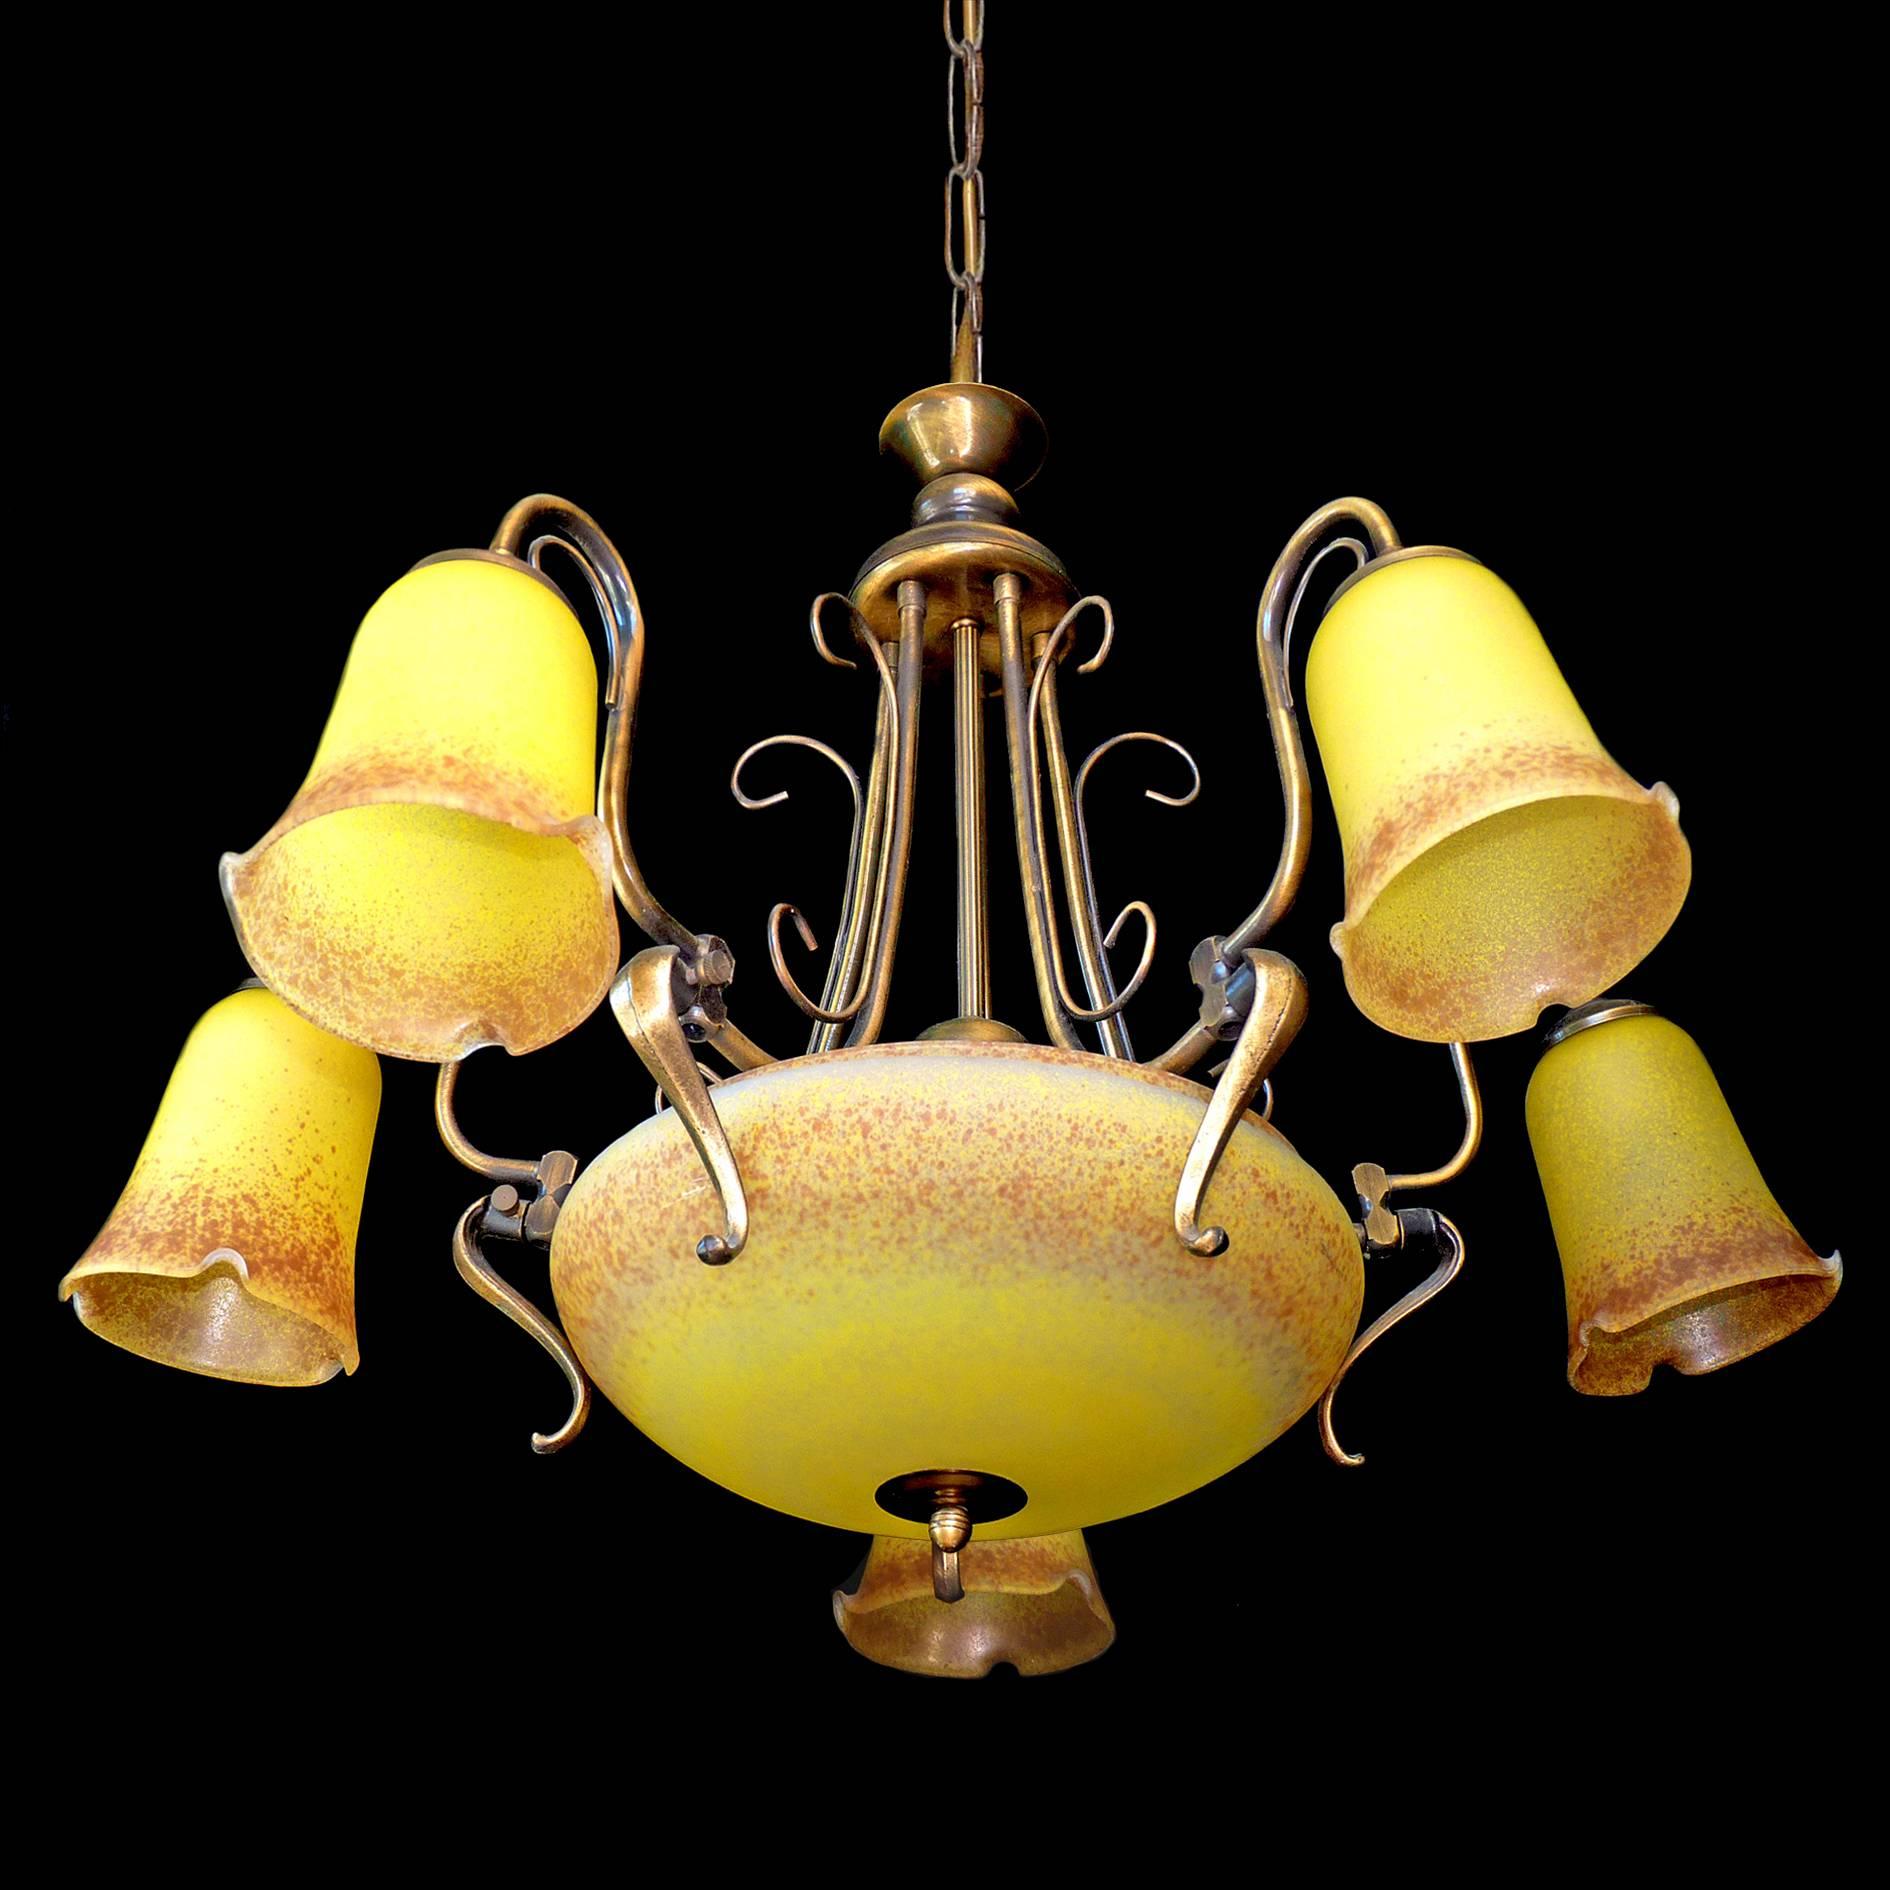 Antique large French Degué style Art Deco/Nouveau deeply colorful poly-chrome yellow art glass chandelier
Materials: Hand blown art-glass shades and solid brass
Measures:
Diameter 28 in / 70 cm
Height 34 in (20 in +14 in/chain)/ 86 cm (50 cm + 36